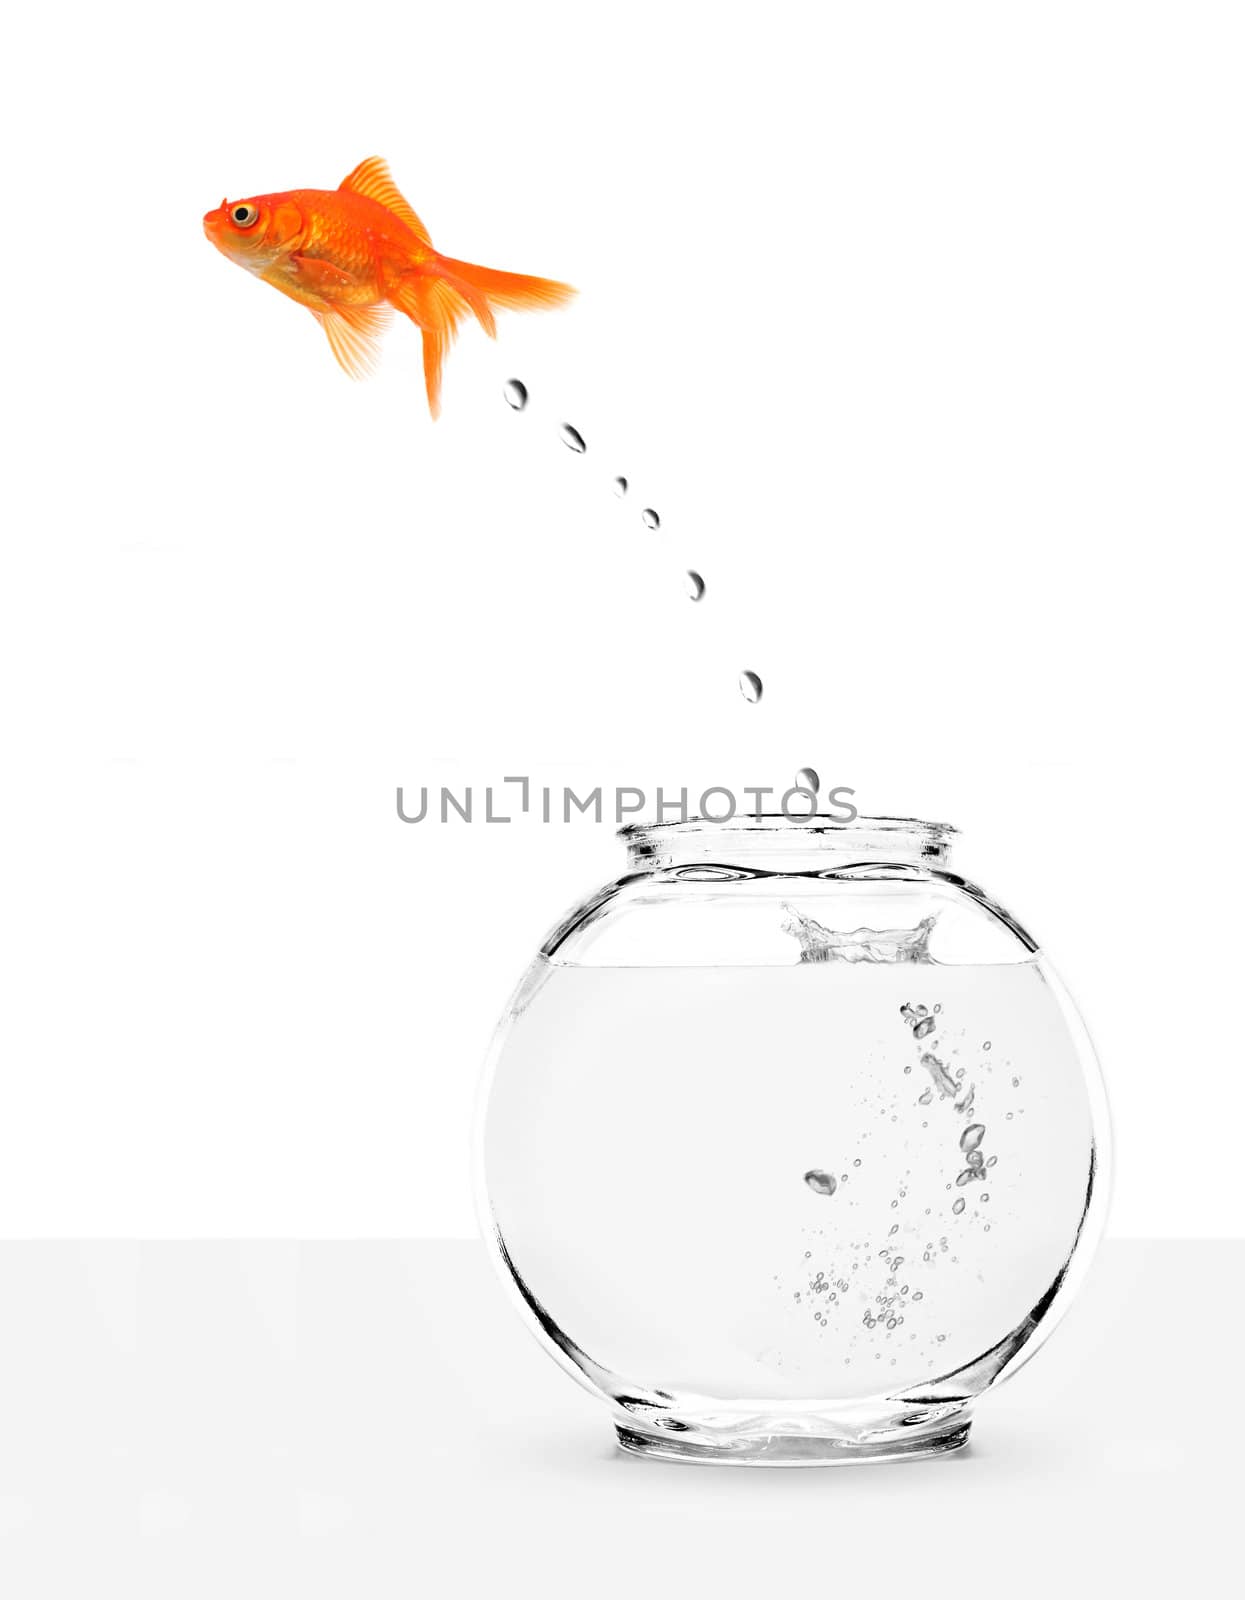 goldfish escaping from fishbowl isolated on white background